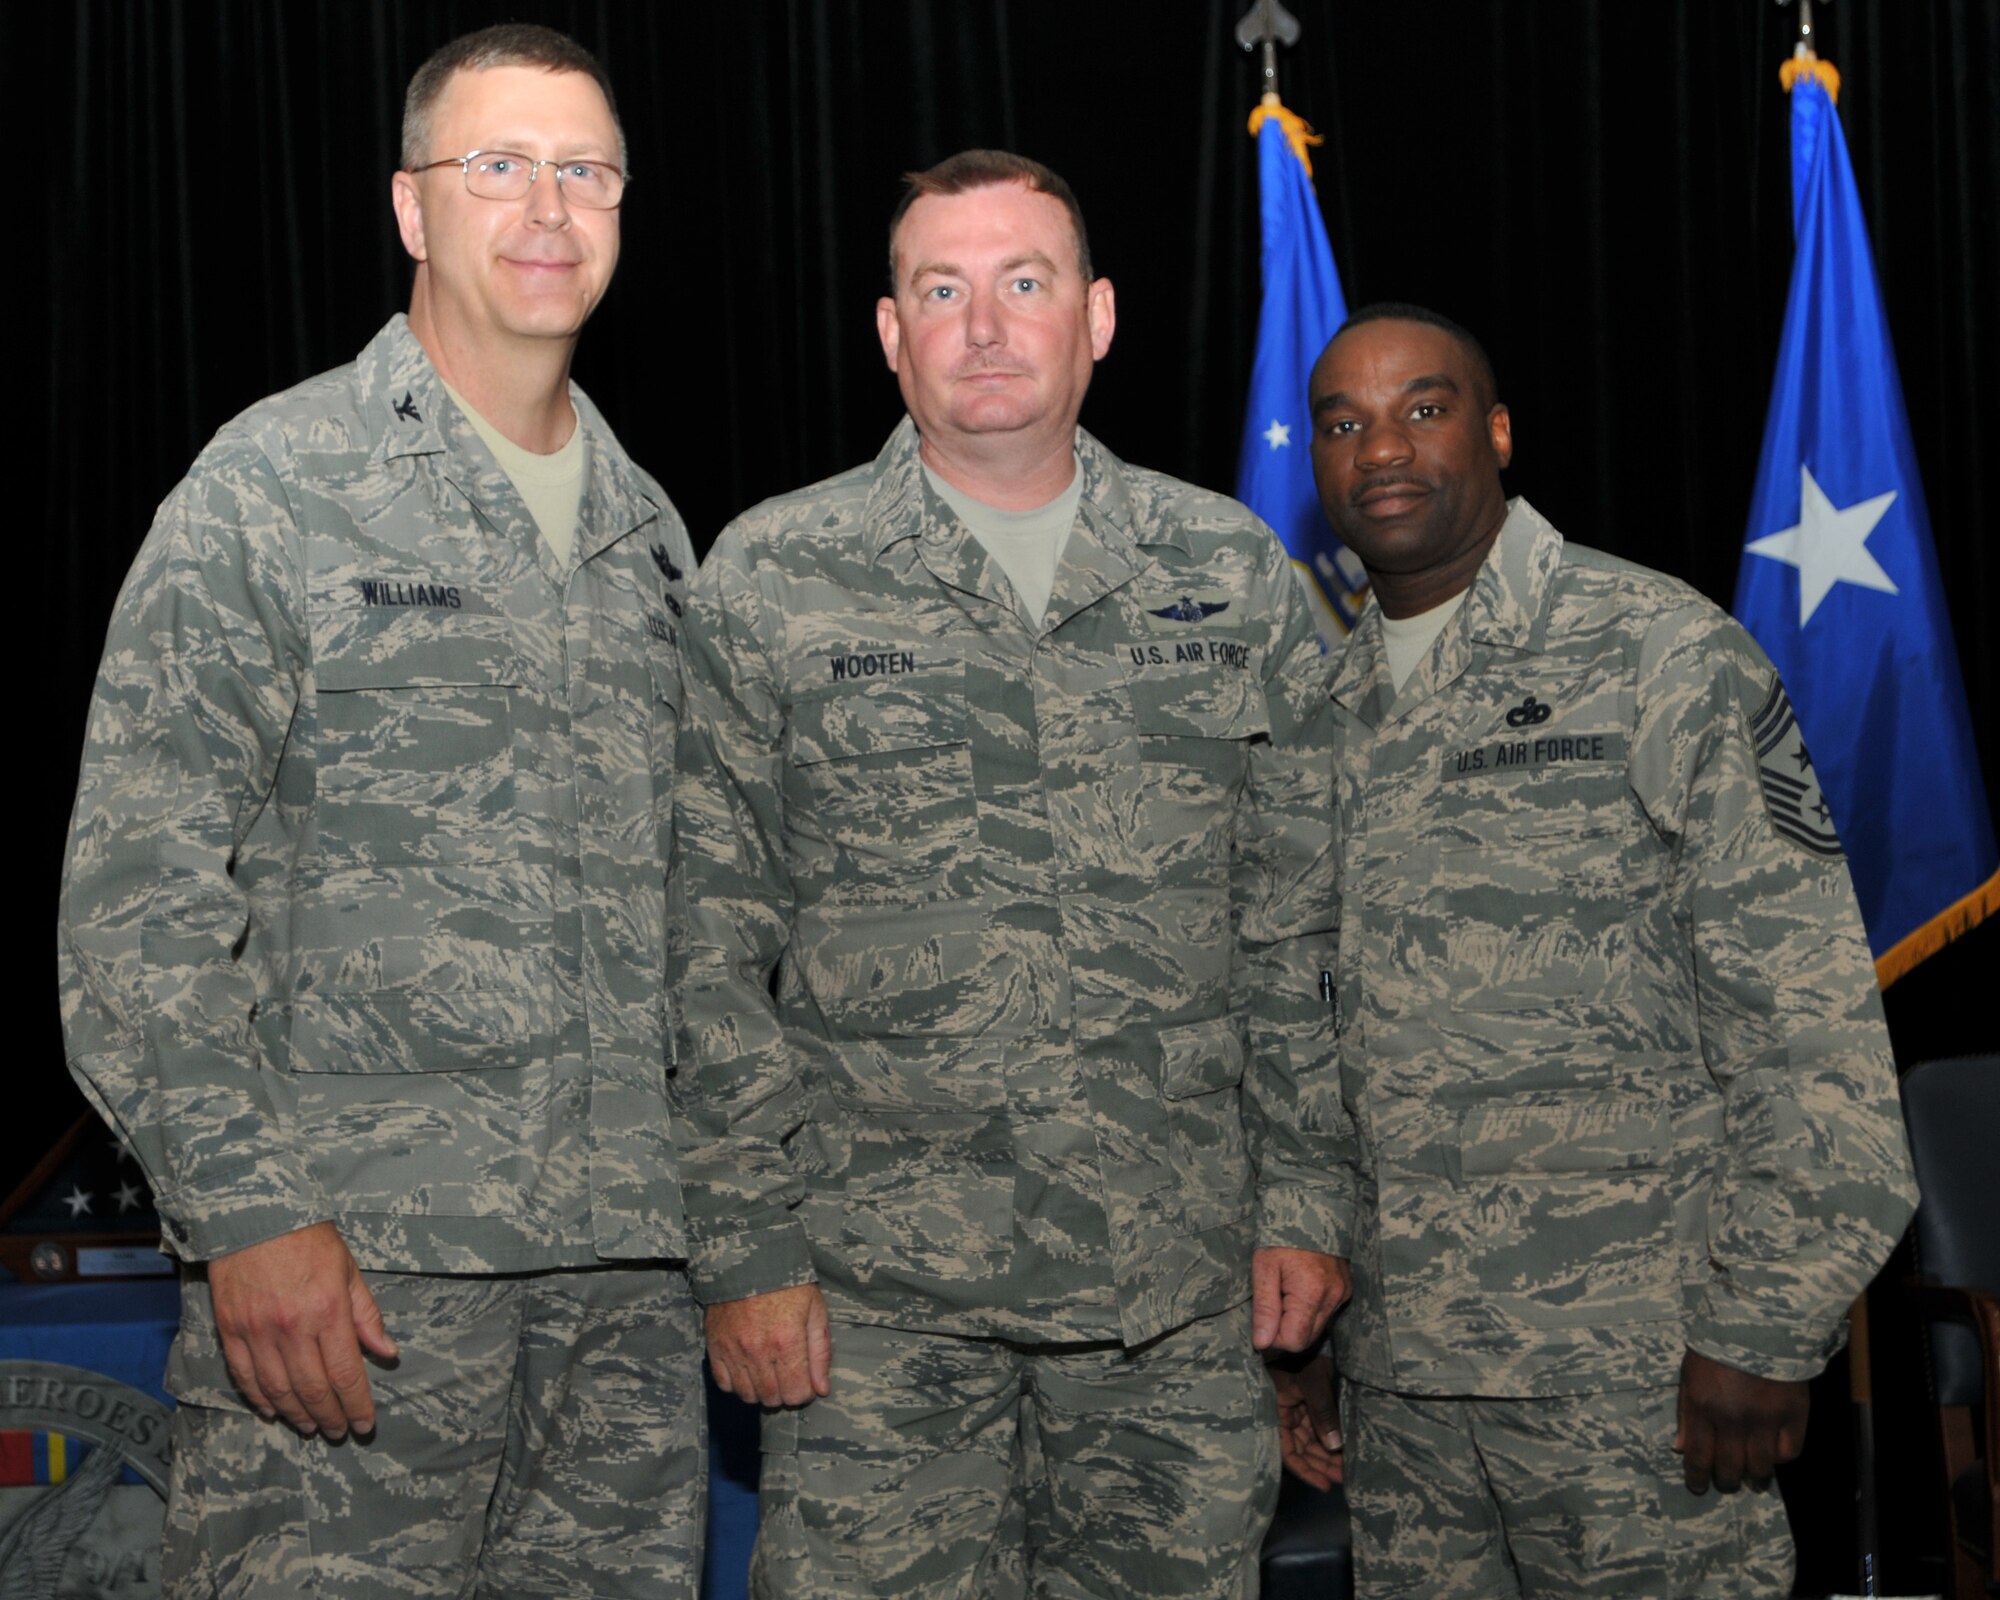 Senior Master Sgt. Donnie Wooten, a member of the 156th Aeromedical Evacuation Squadron, receives recognition and appreciation from Colonel Roger E. Williams, Jr., 145th Airlift Wing Commander and Command Chief Master Sergeant Maurice Williams during an official Air National Guard ceremony known as the Hometown Heroes Salute.  Each airman who served 30 or more days away from home throughout operations Iraqi Freedom, Enduring Freedom and New Dawn is awarded a framed Hometown Heroes Salute Coin with a Letter of Appreciation signed by the ANG Director and Command Chief Master Sergeant, and a Pen & Pencil Set for their spouse or significant other. (National Guard photo by Tech. Sgt Brian Christiansen, 145th Public Affairs)